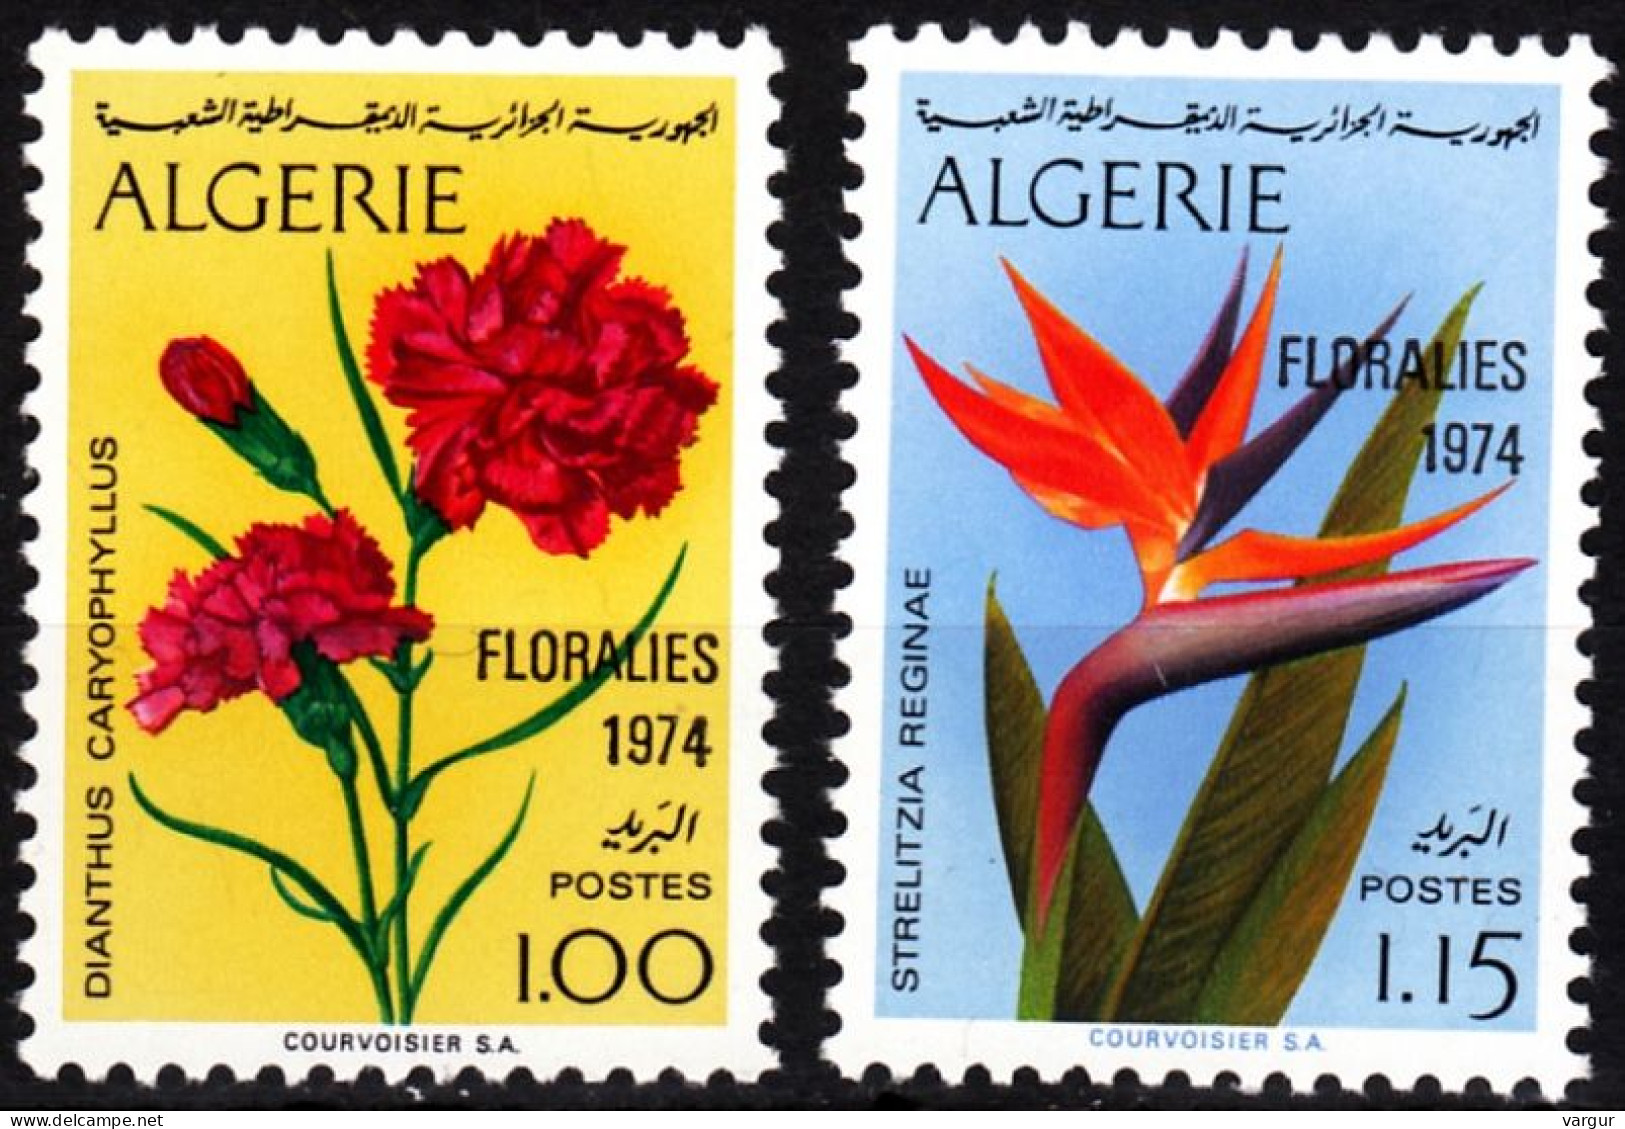 ALGERIA 1974 Flowers. Pink Orchid, Overprinted. Complete, MNH - Orchidées